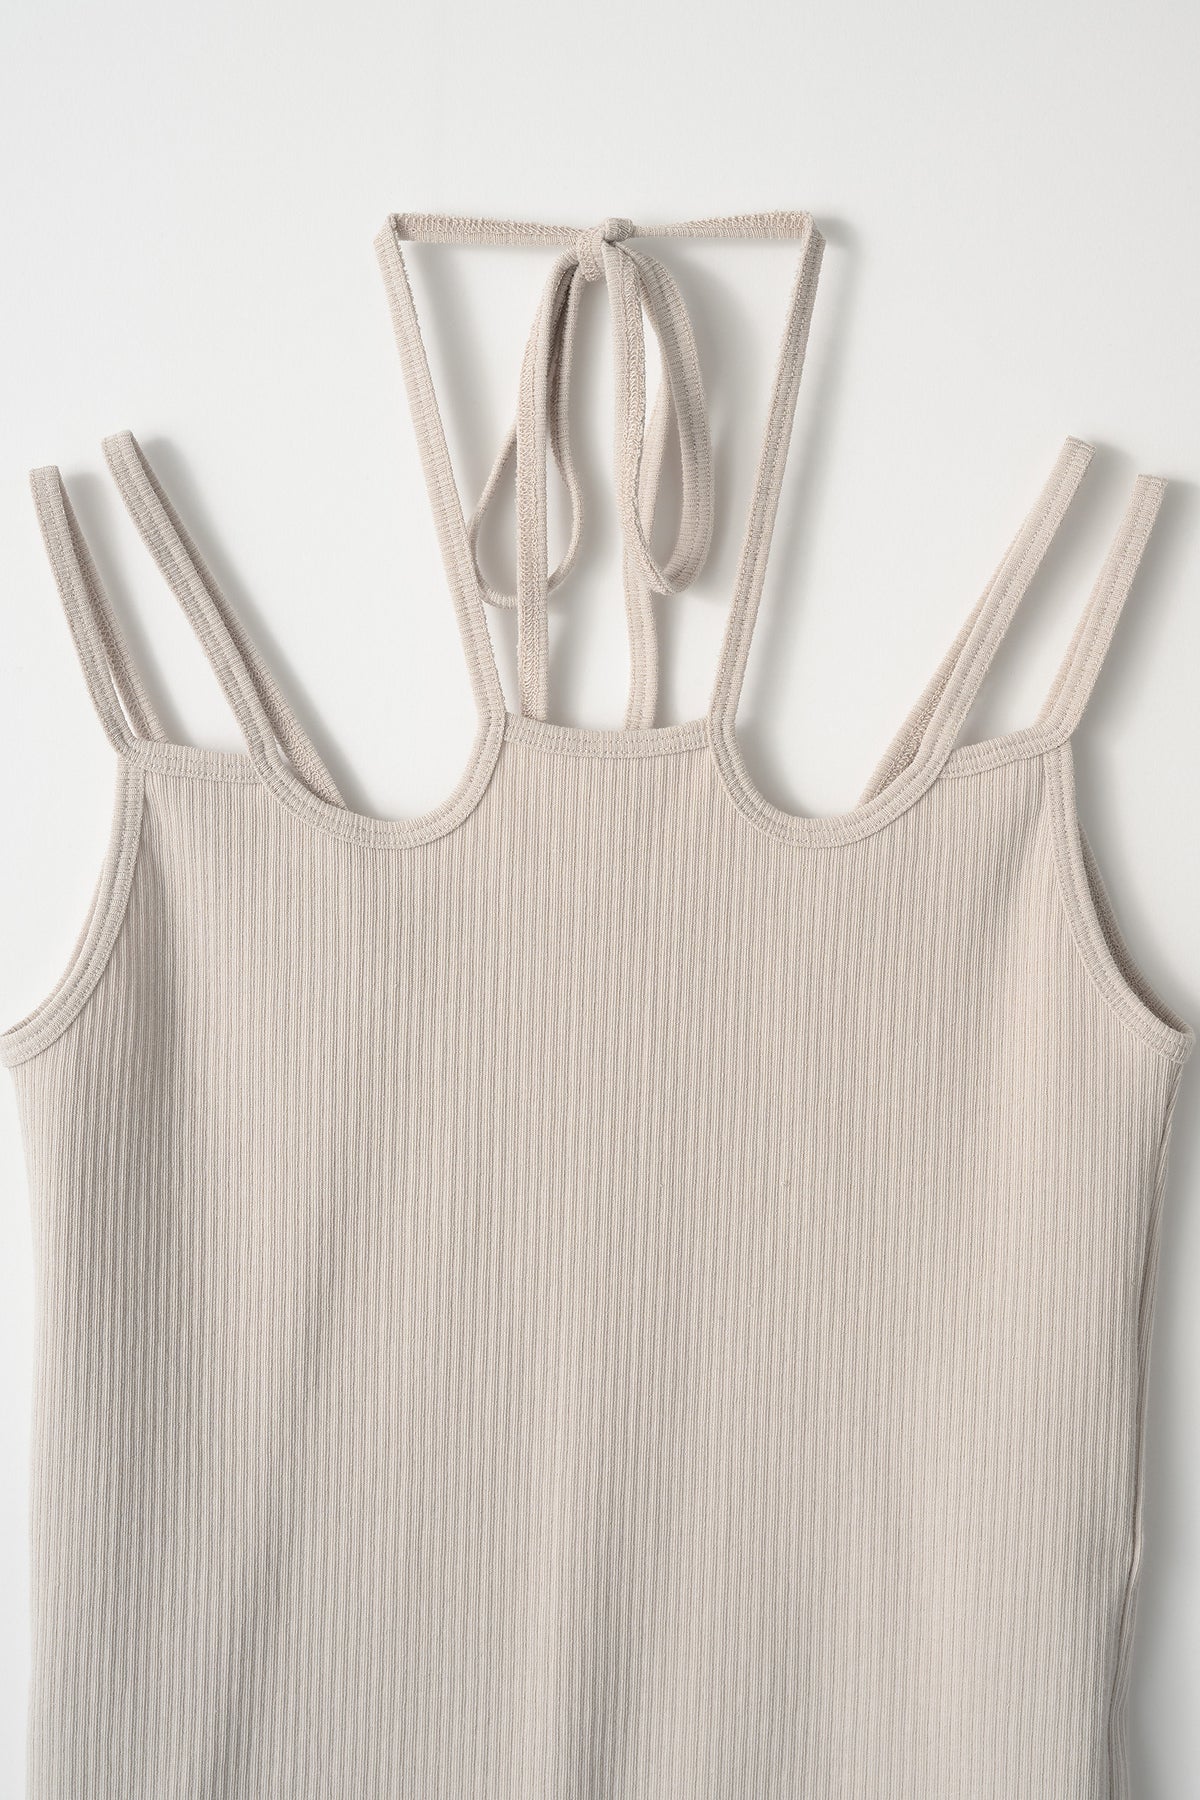 Ivy camisole top (Gray)